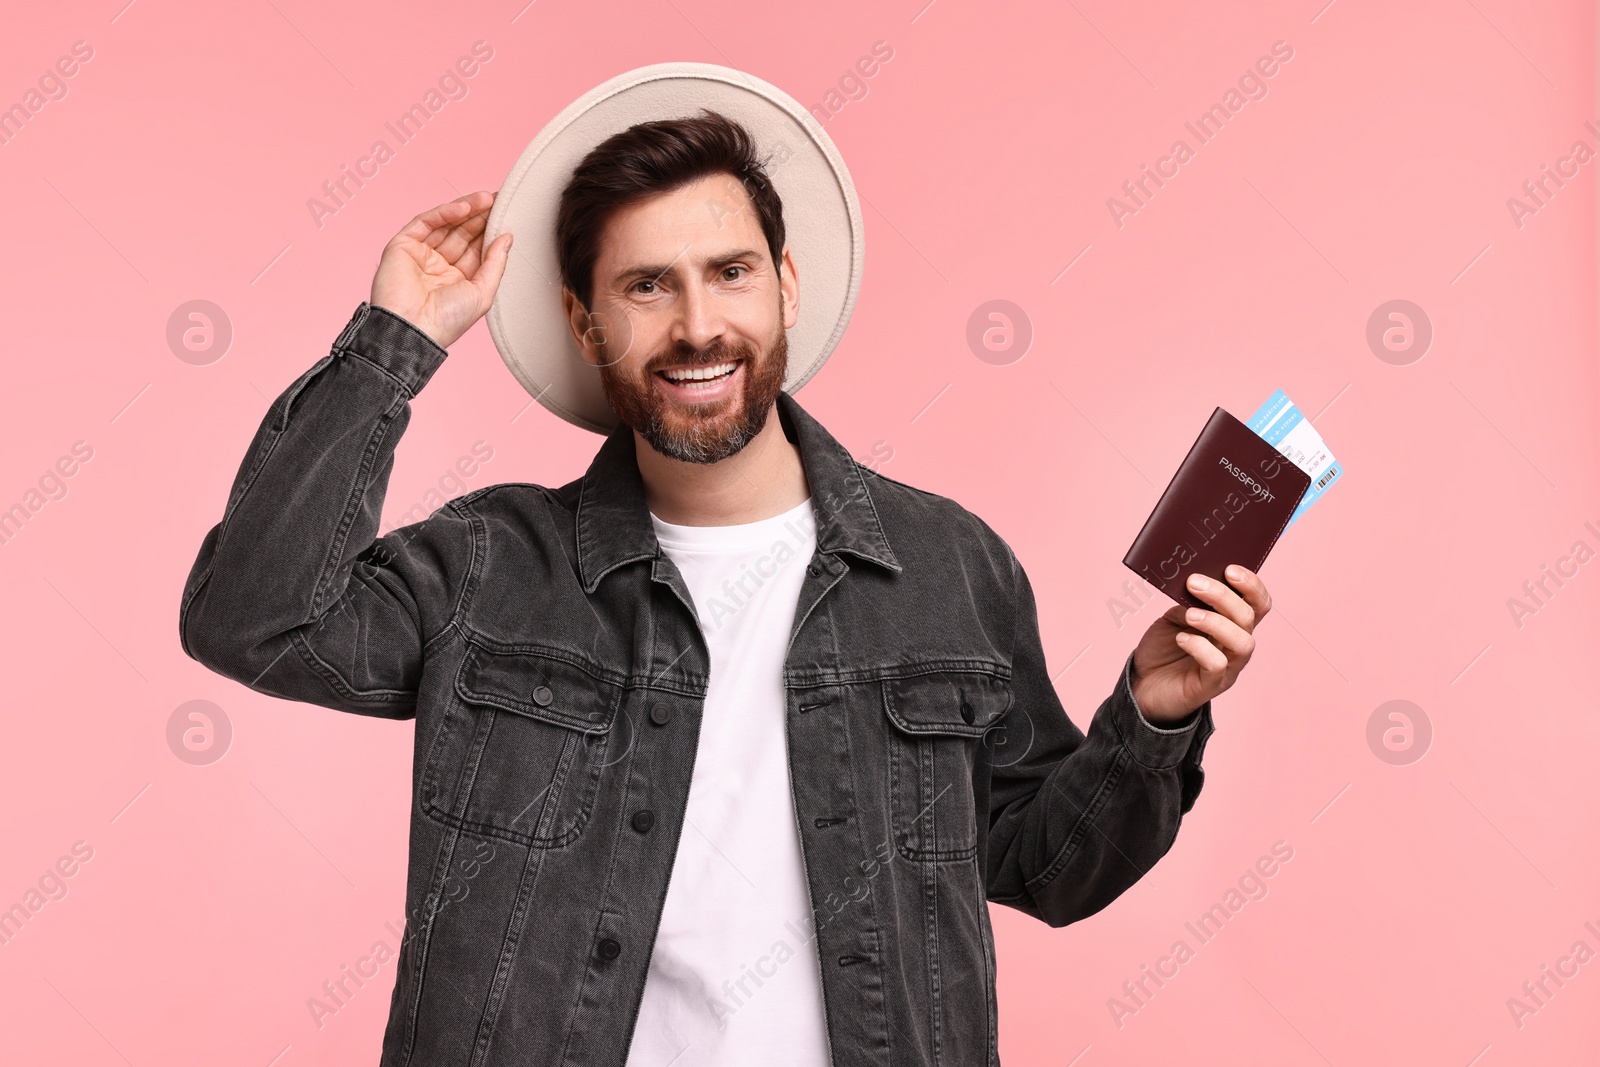 Photo of Smiling man with passport and tickets on pink background